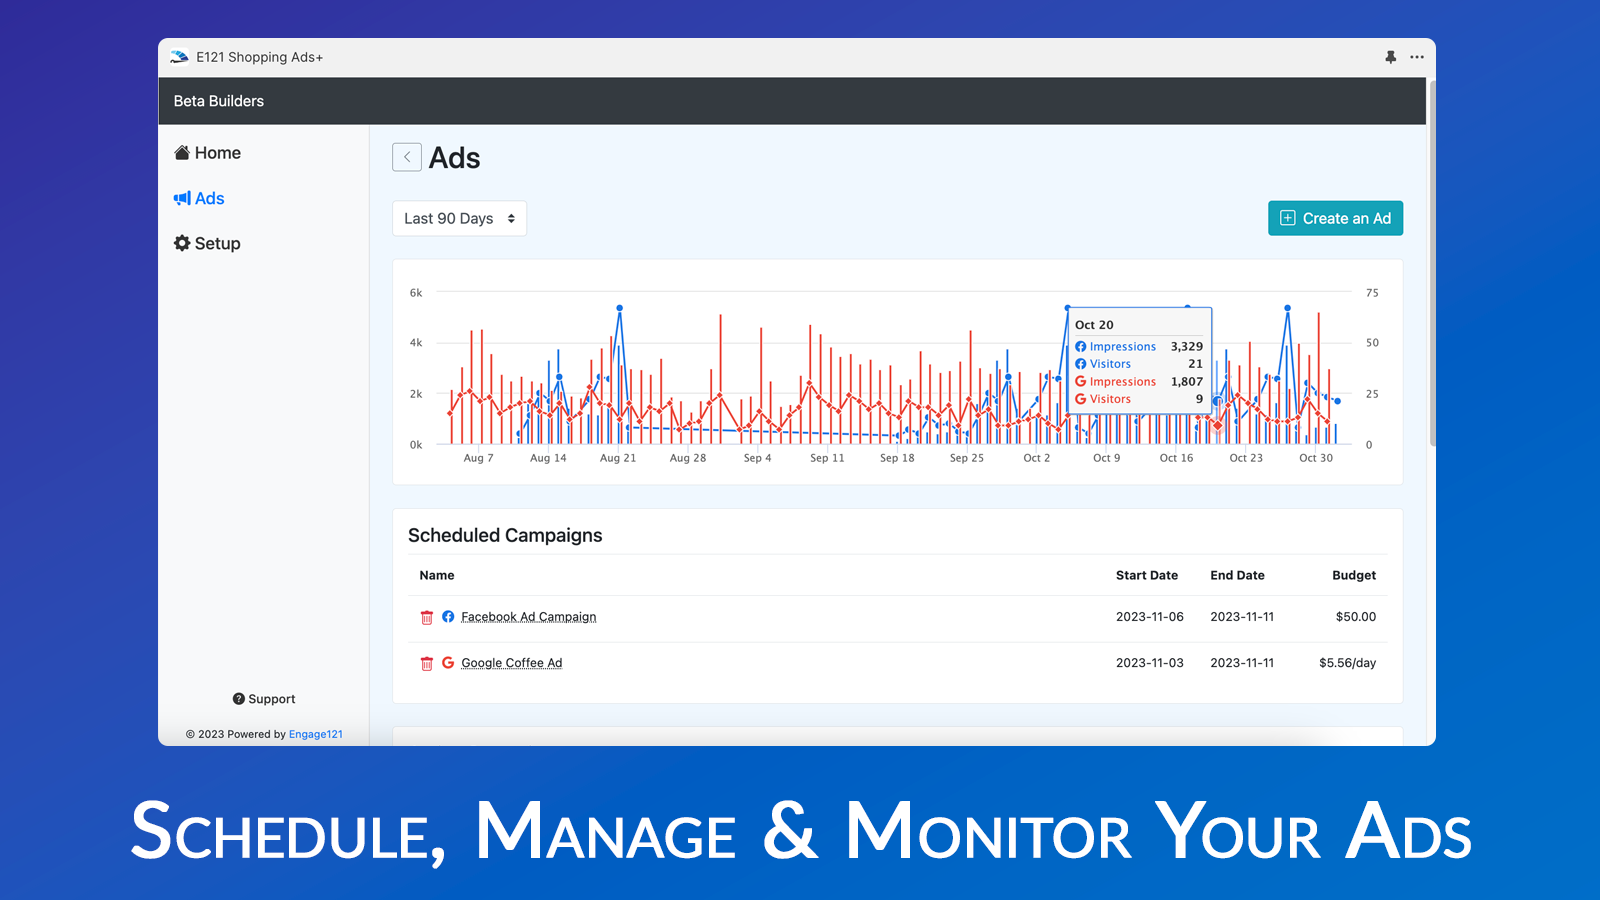 Schedule, Manage & Monitor Your Ads